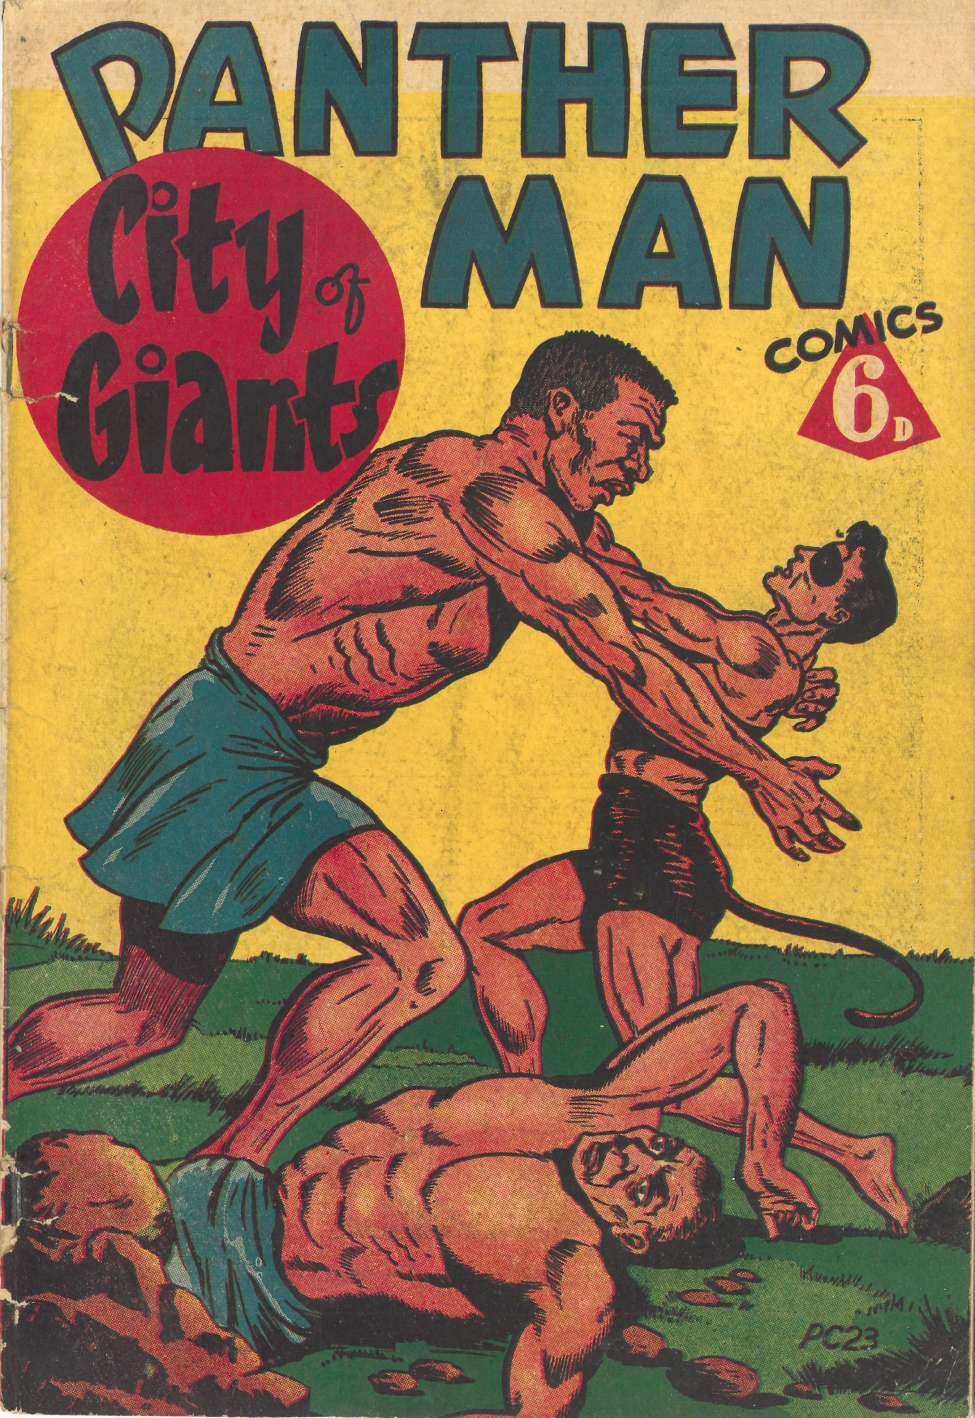 Comic Book Cover For Panther Man - City of Giants